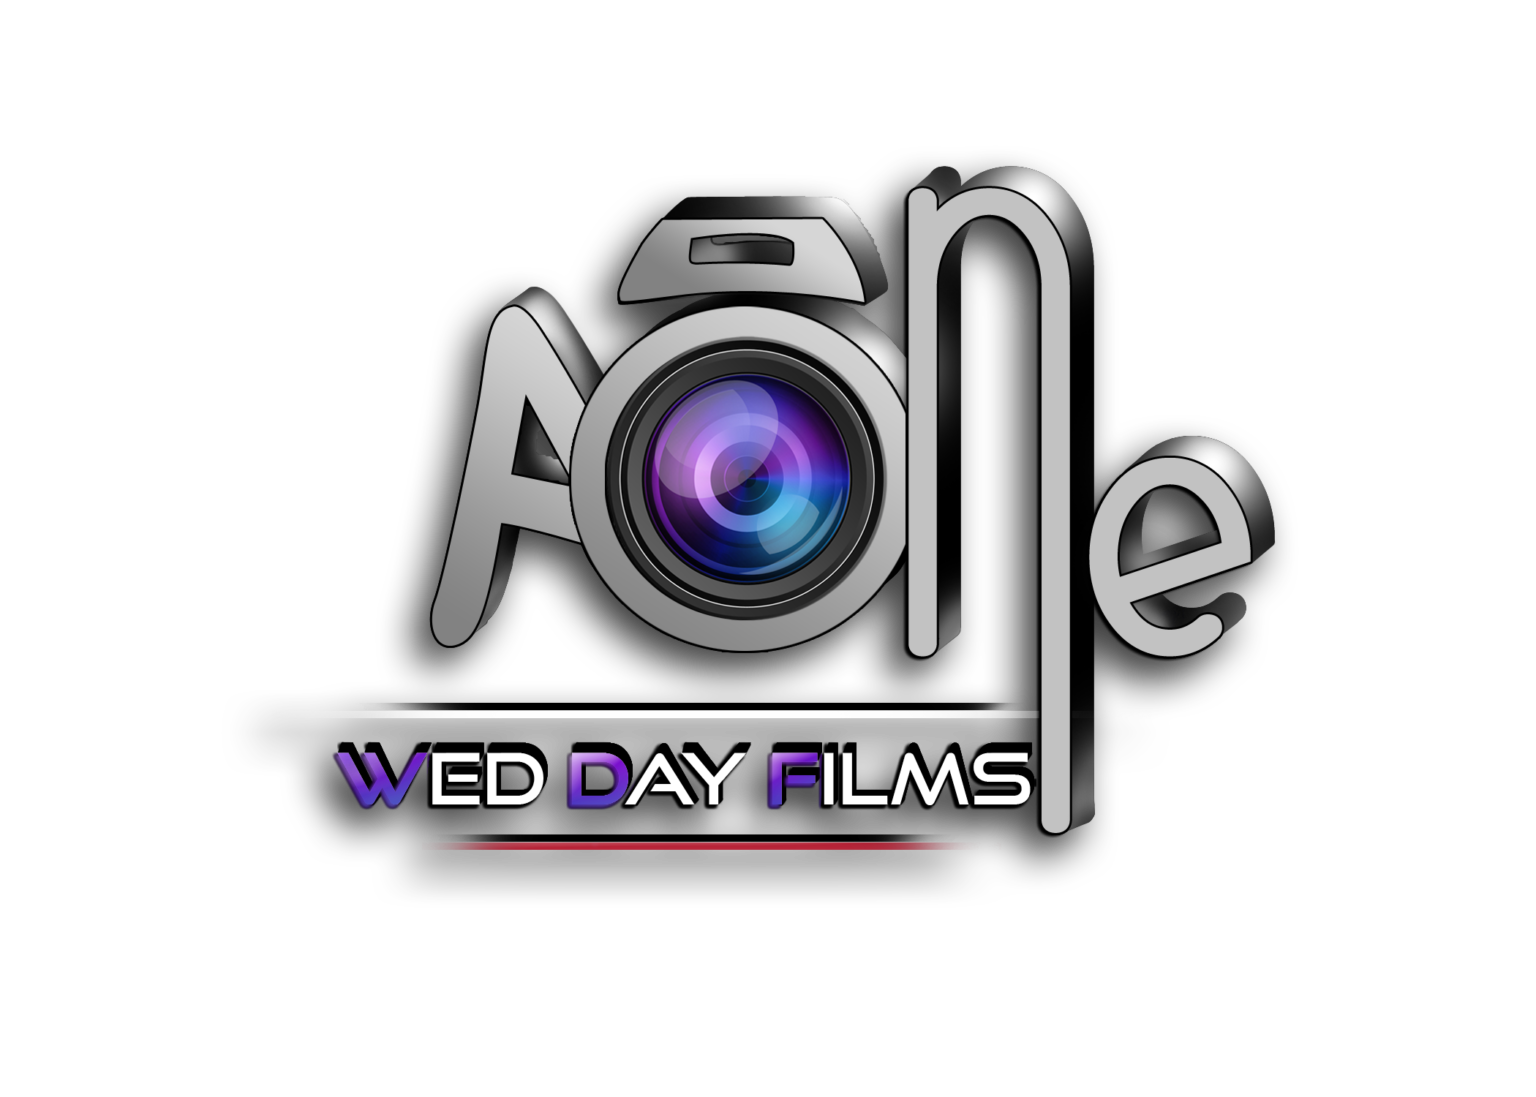 A-One Wed Day Films|Banquet Halls|Event Services